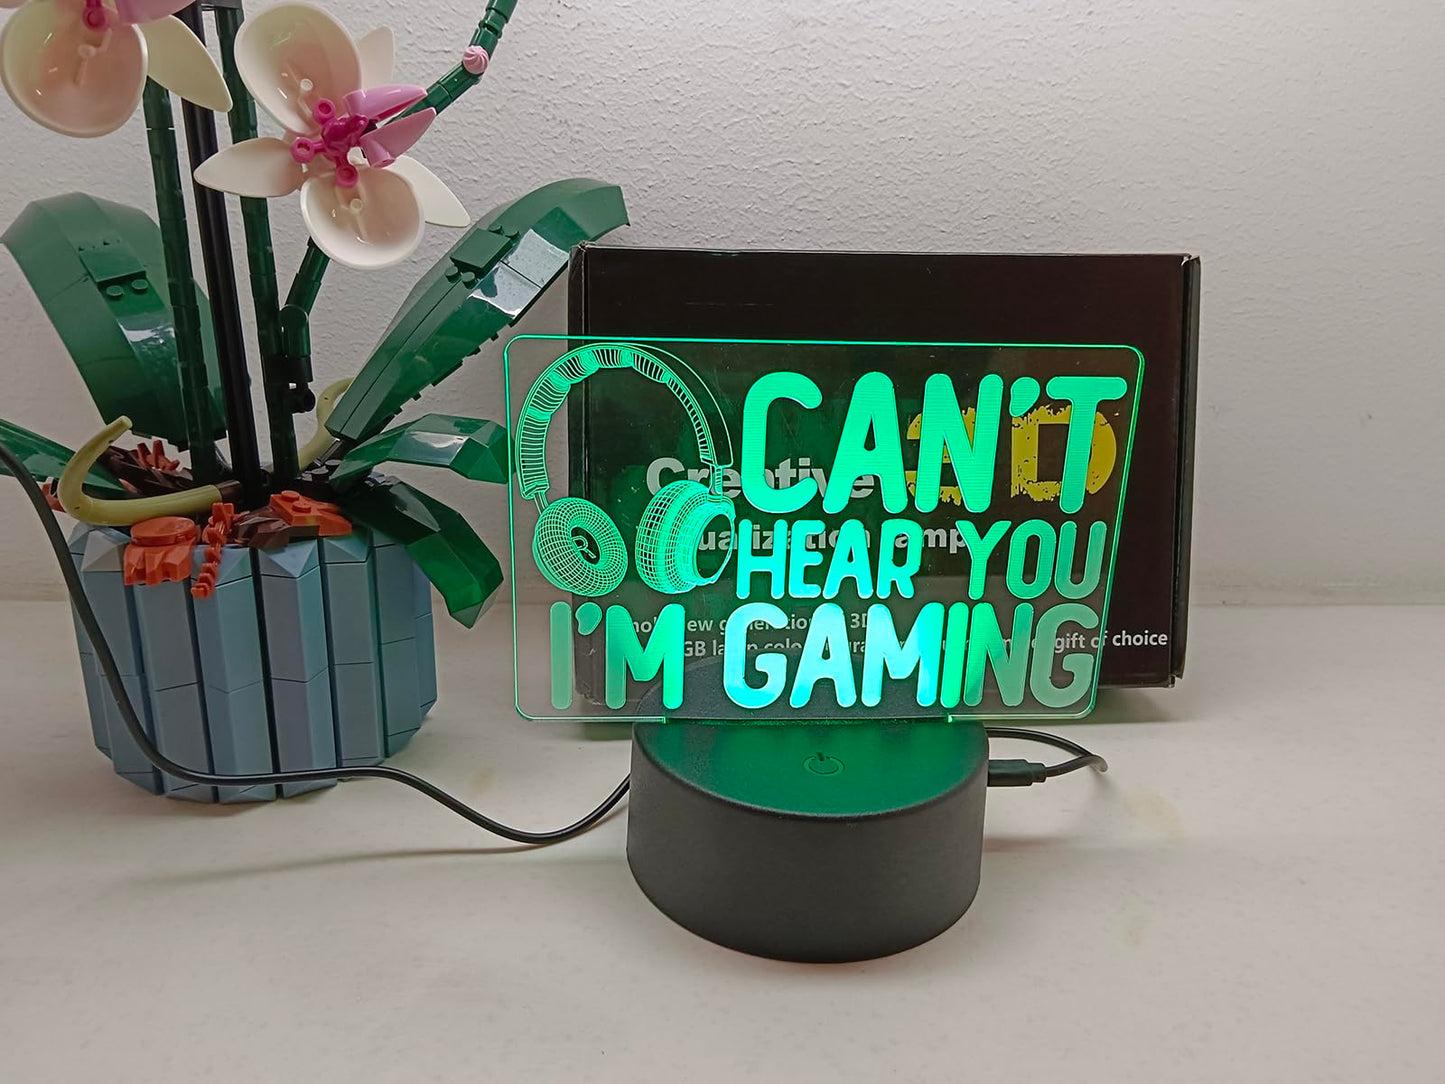 XOIDMIVCN Gamer Night Light, Can't Hear You I'm Gaming Night Light for Boys Girls, 3D Illusion Lamp with 16 Color LED Bedside Lamp with Touch & Remote for Bedroom Kids Room Gamer Room